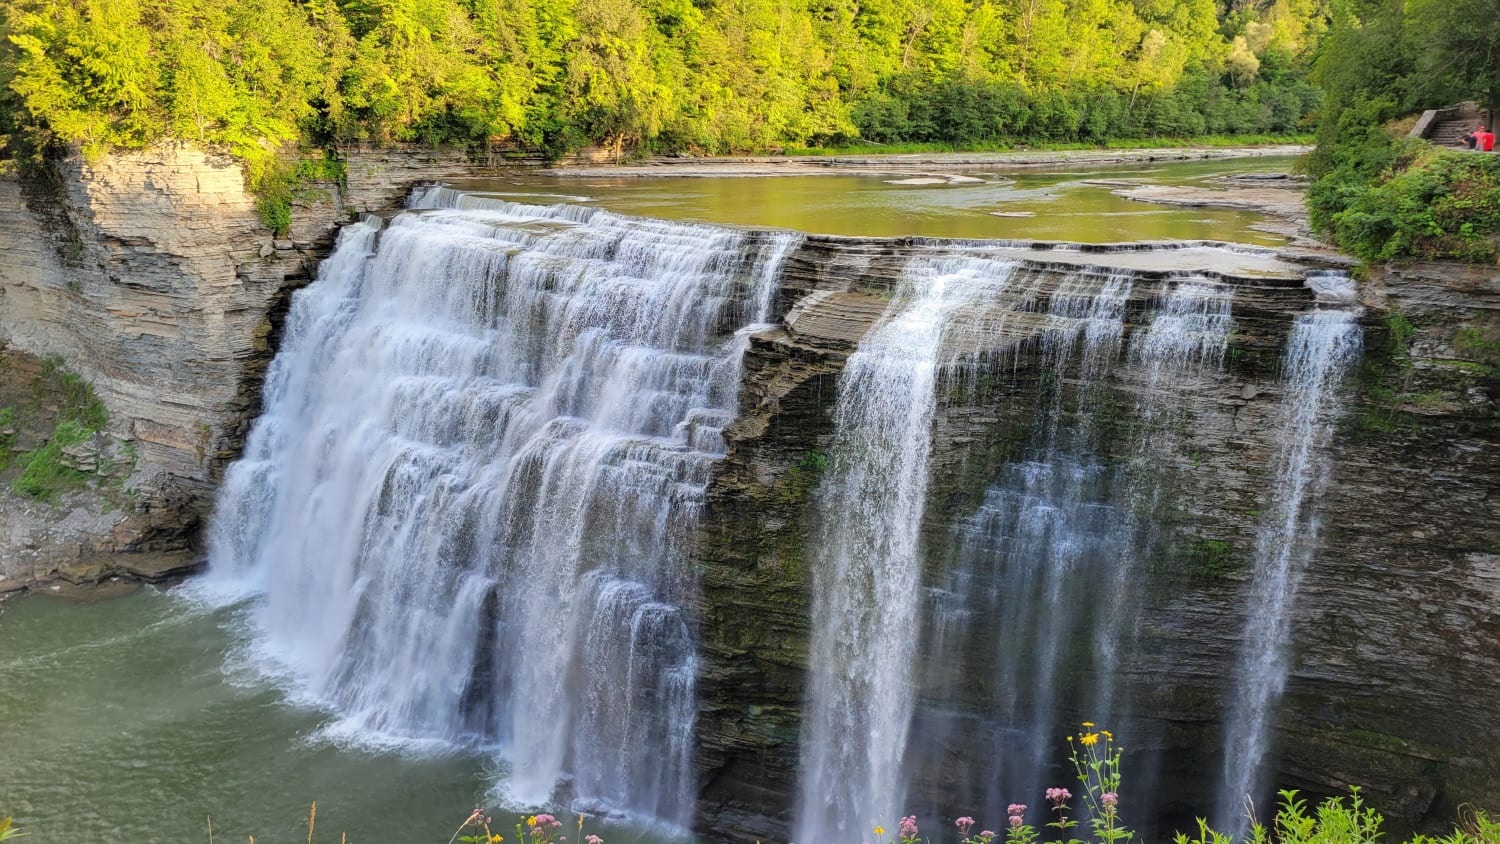 Waterfall at Letchworth State Park in New York.